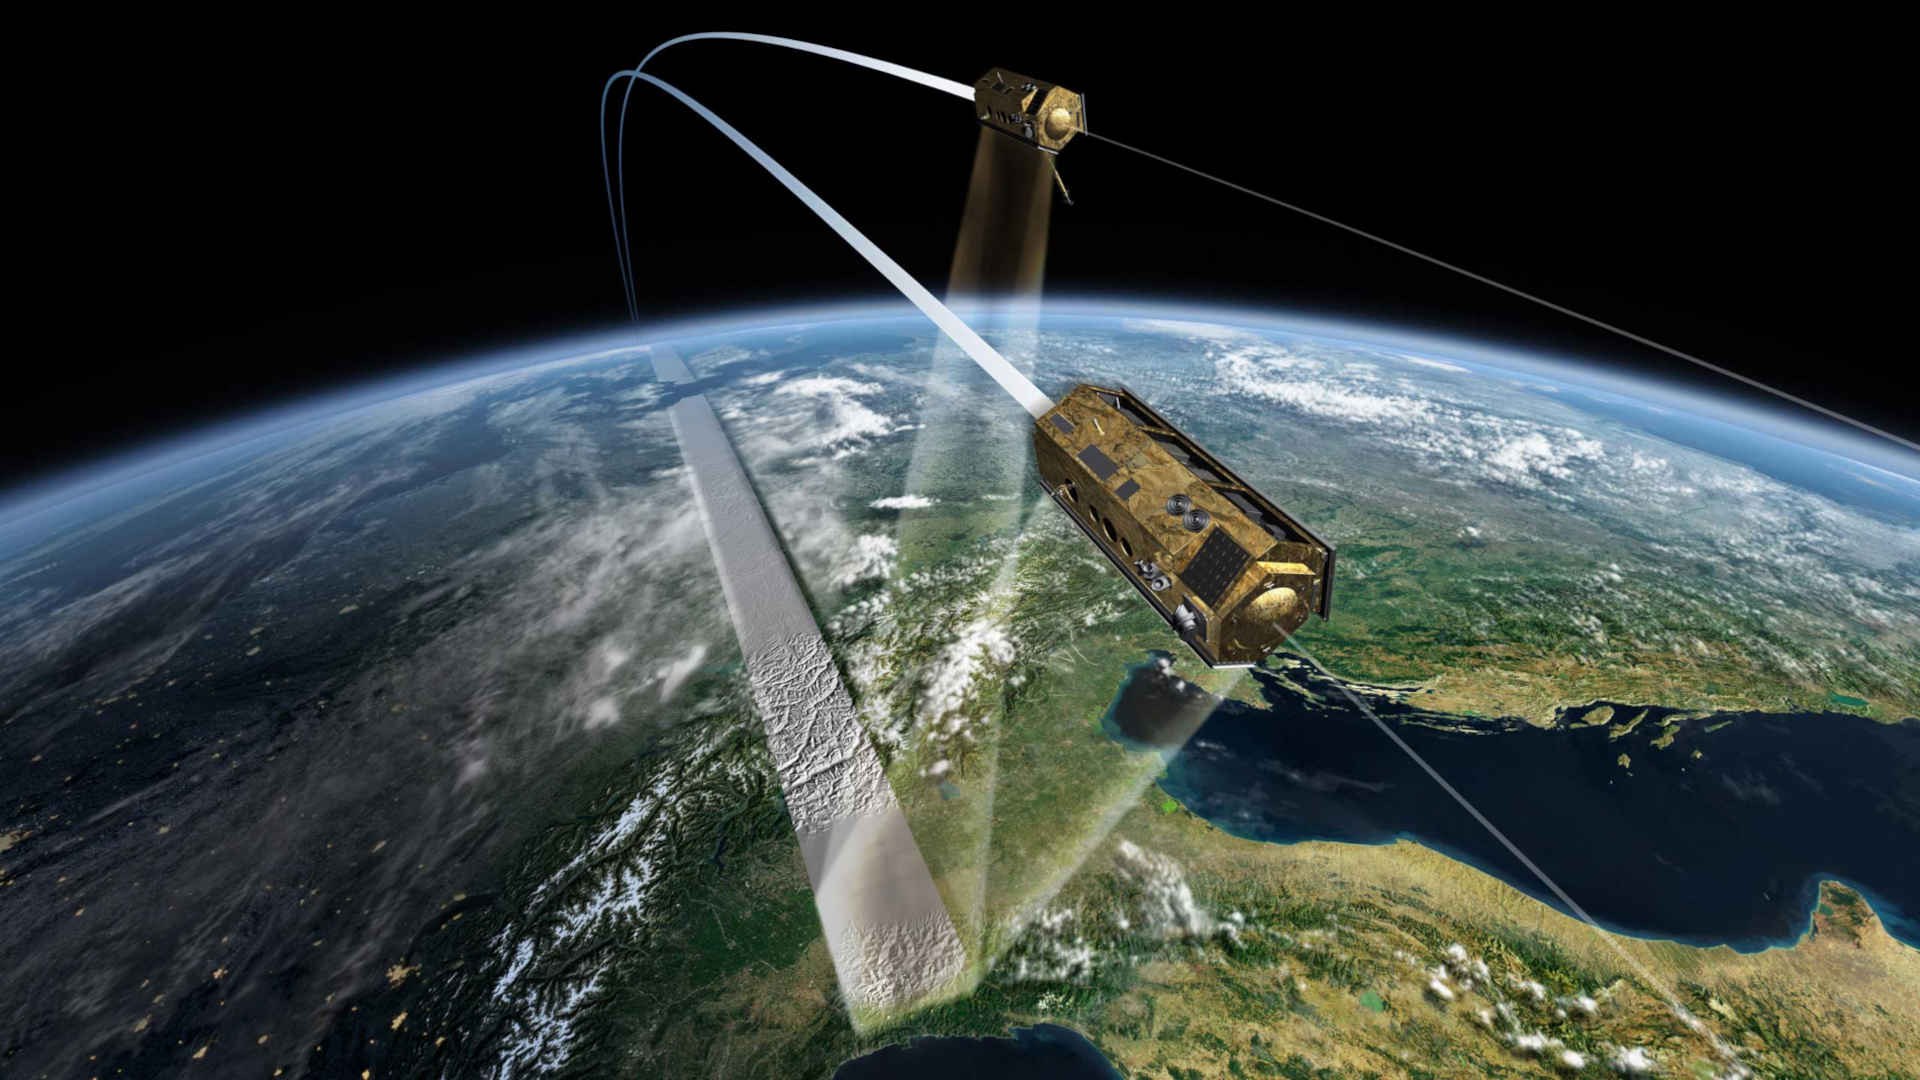 The TerraSAR-X and TanDEM-X satellites in formation flight